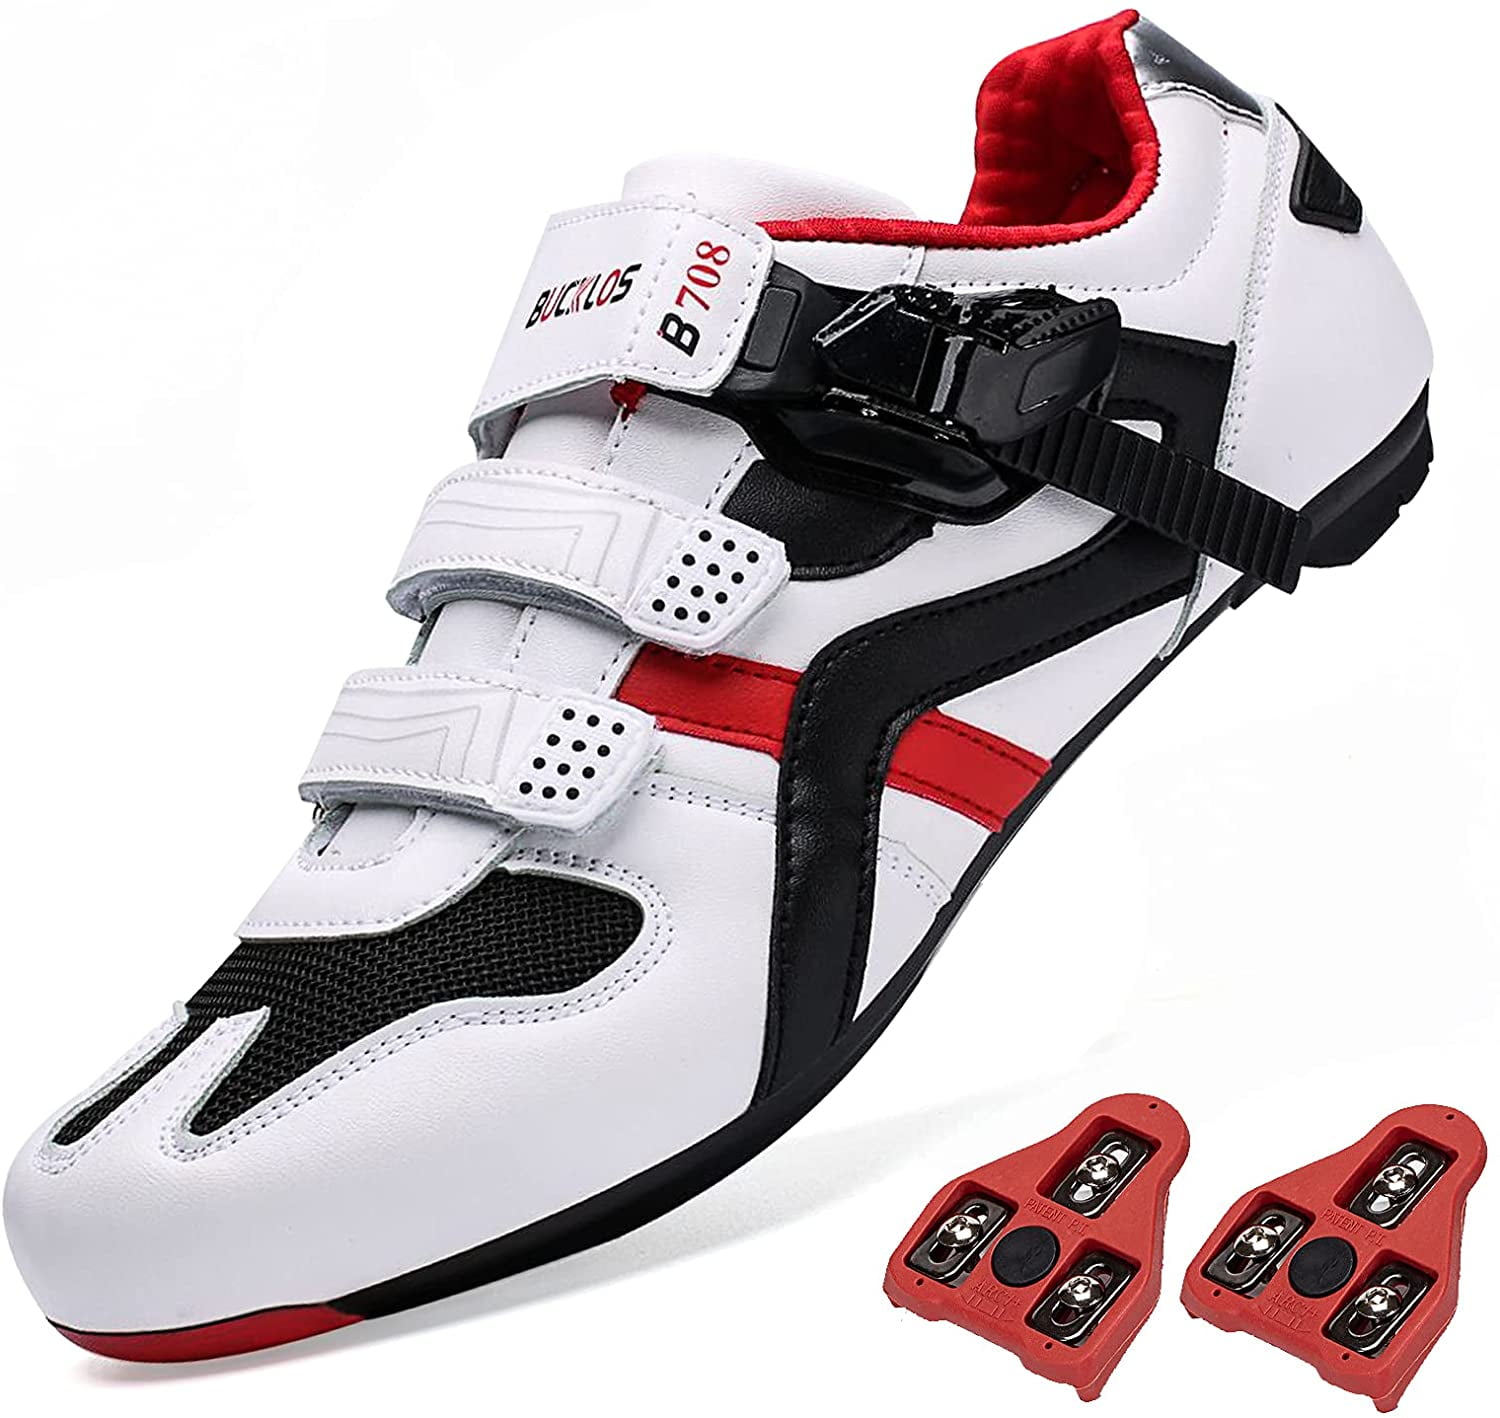 BUCKLOS Cycling Shoes Mens Compatible with Peloton Indoor Outdoor Biking Shoes Precise Buckle Strap fit Spinning Shoes Bicycle Sneakers for SPD Look Delta Lock Pedal 